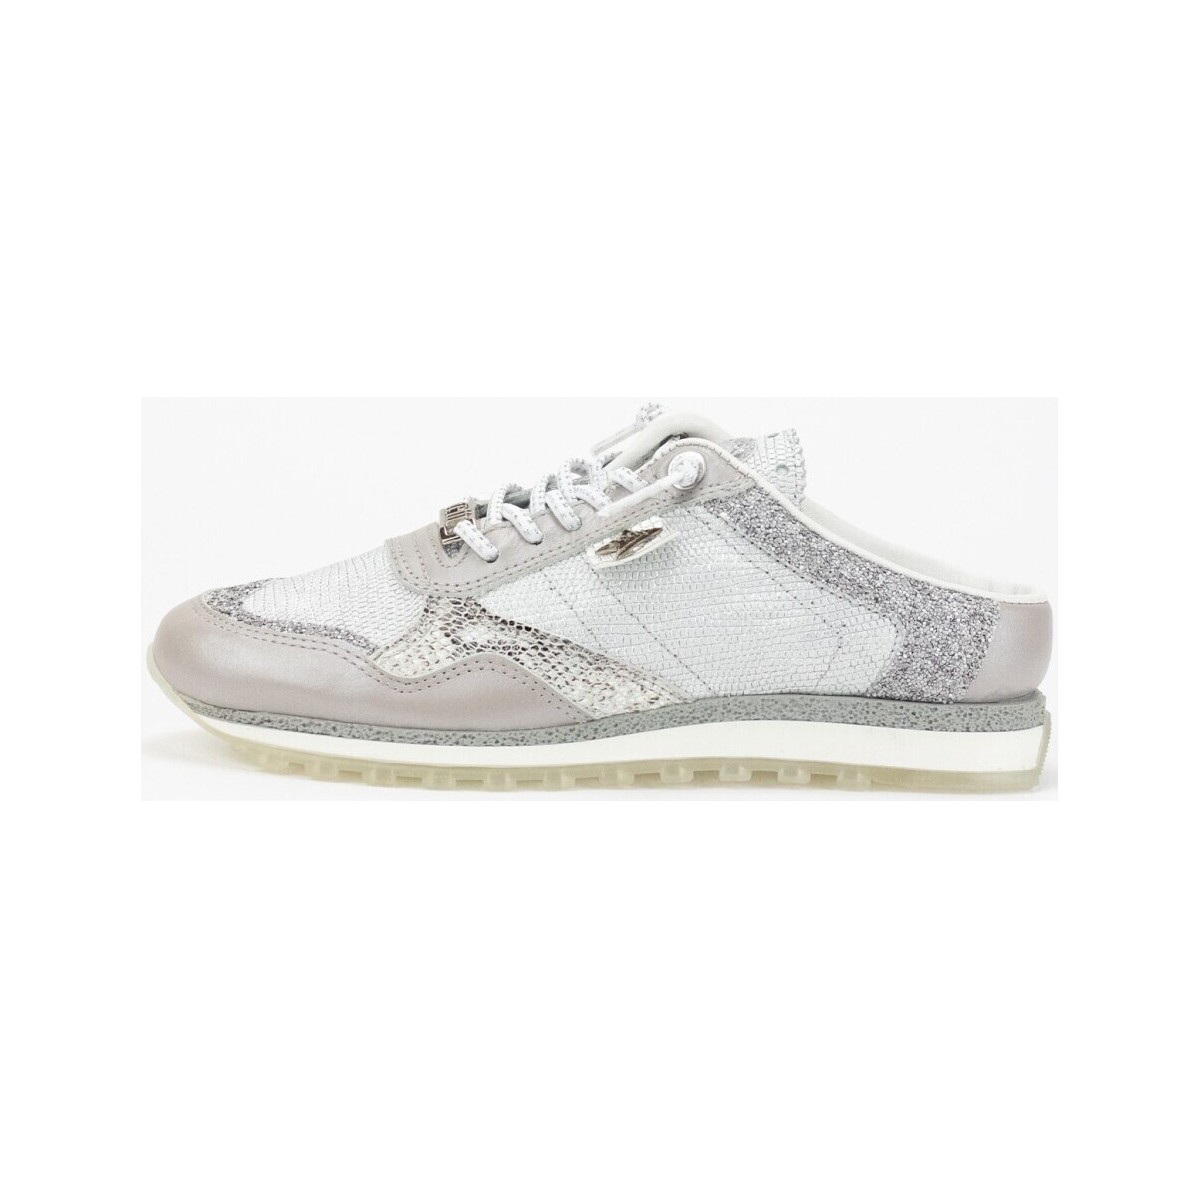 Chaussures Femme Mules Cetti 34467 GRIS